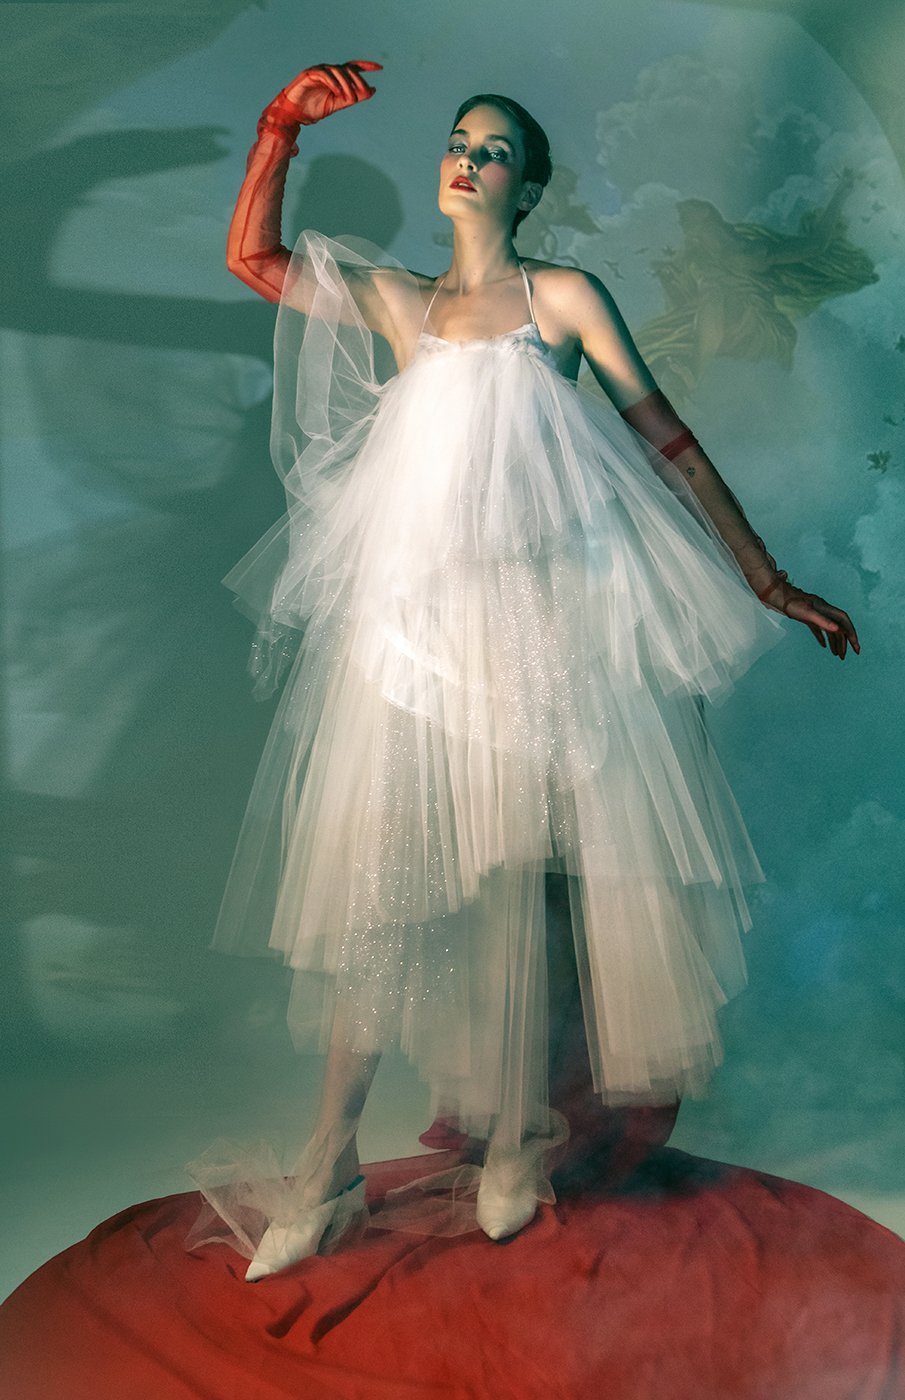 Model Amelia Pool wearing white layered toile dress and red gloves in front projected Renaissance art shot by Kirsten Miccoli